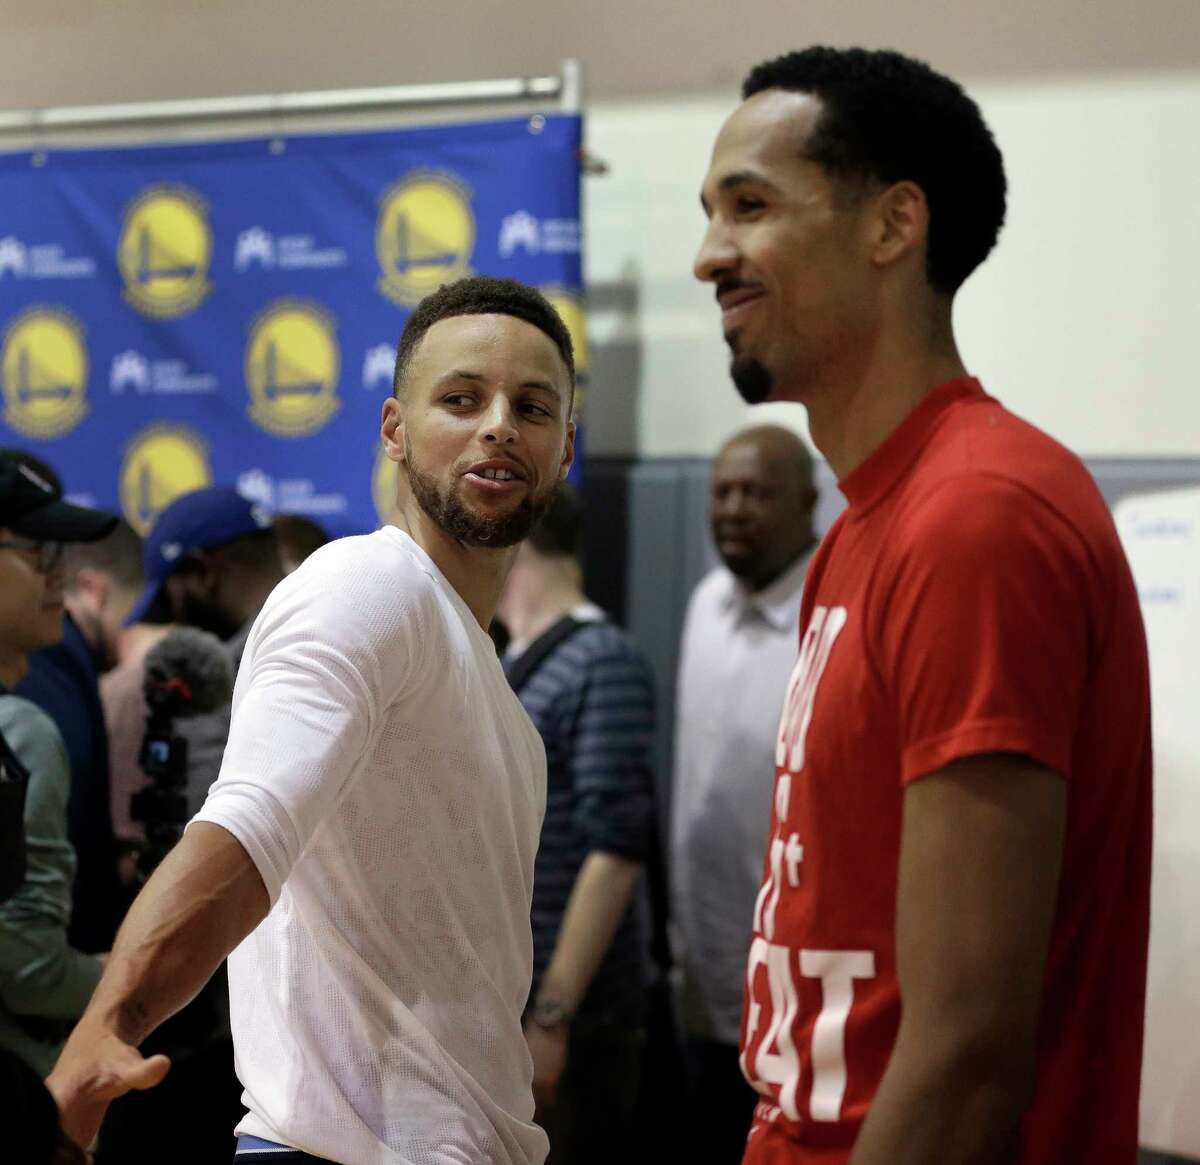 Golden State Warriors' Stephen Curry, left, and Shaun Livingston speak with reporters during a news conference Wednesday, June 14, 2017, in Oakland, Calif. The Warriors won the NBA championship over the Cleveland Cavaliers earlier in the week.. (AP Photo/Ben Margot)